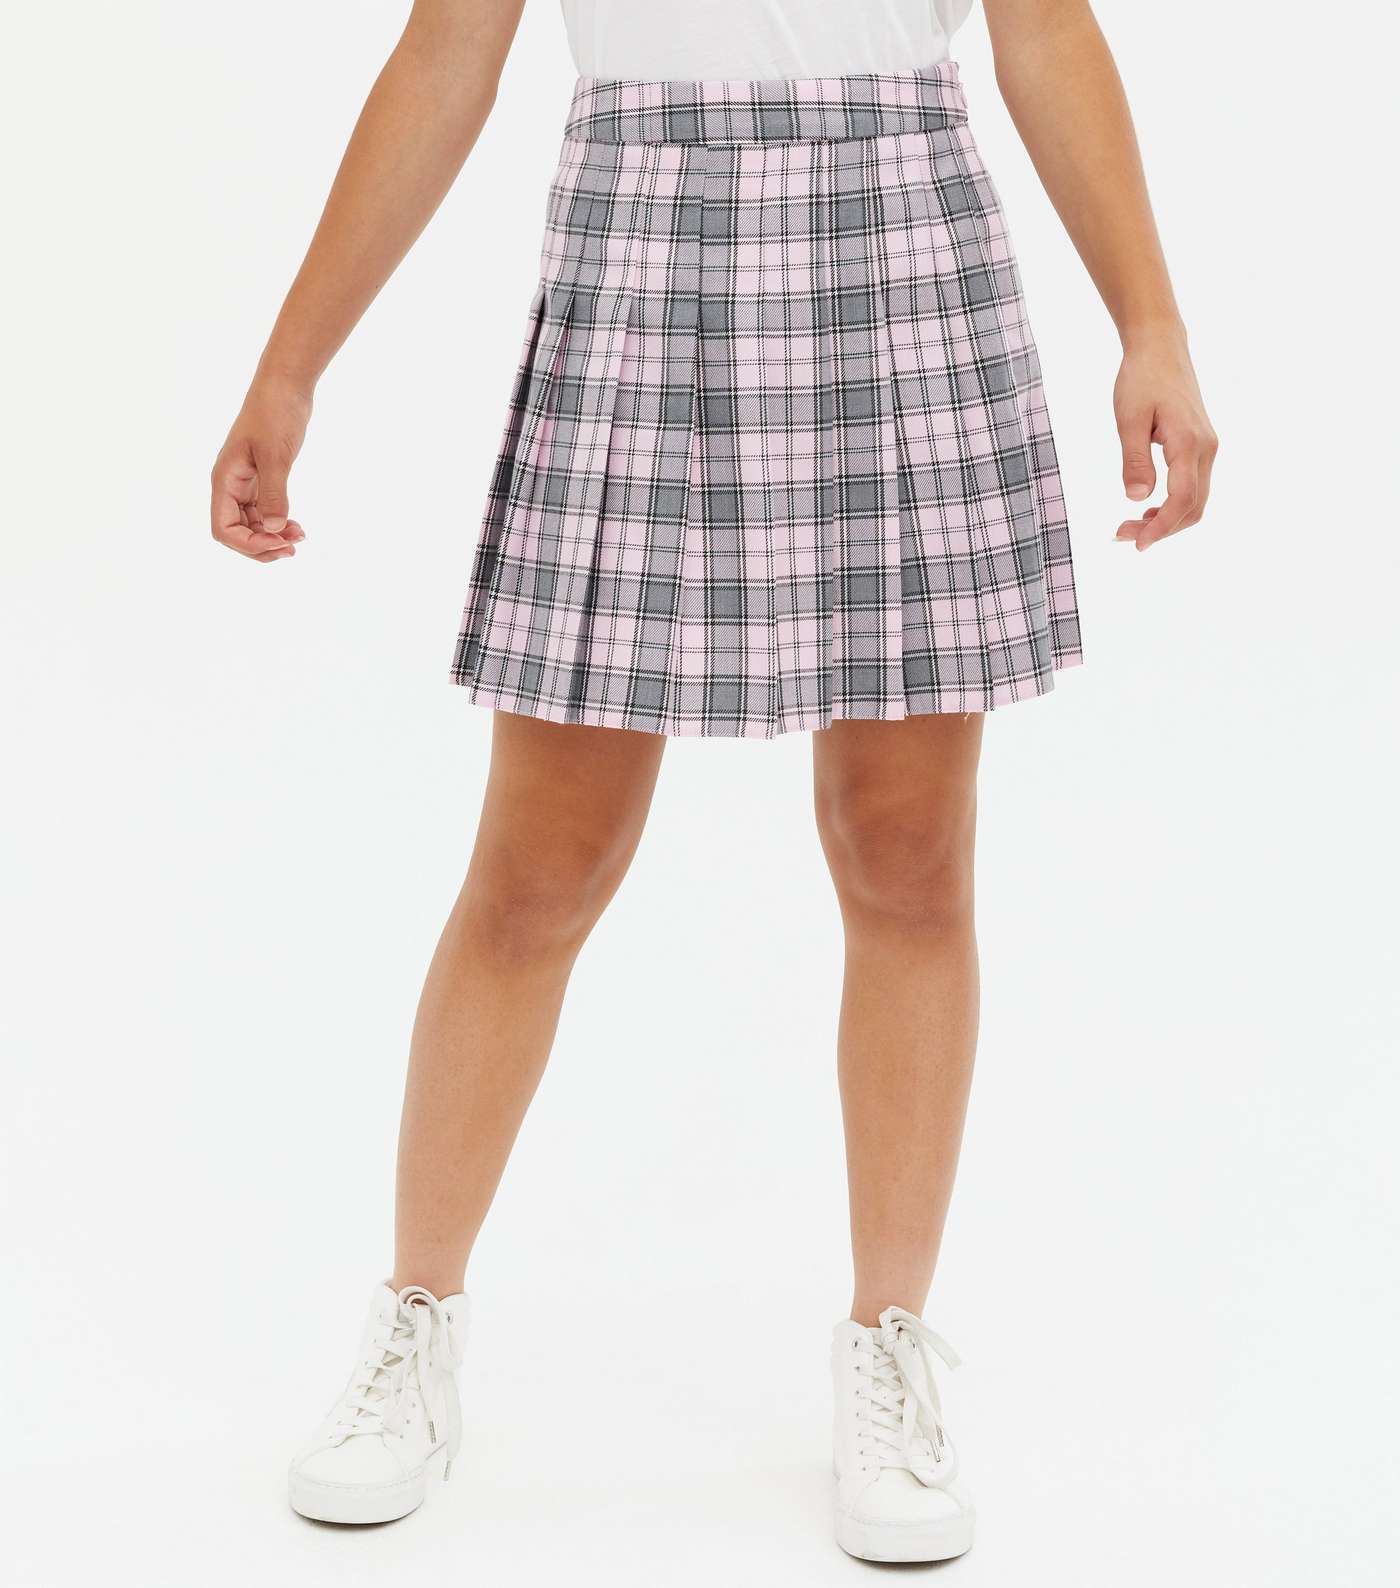 Girls Pale Pink Check Pleated Mini Tennis Skirt Image 2